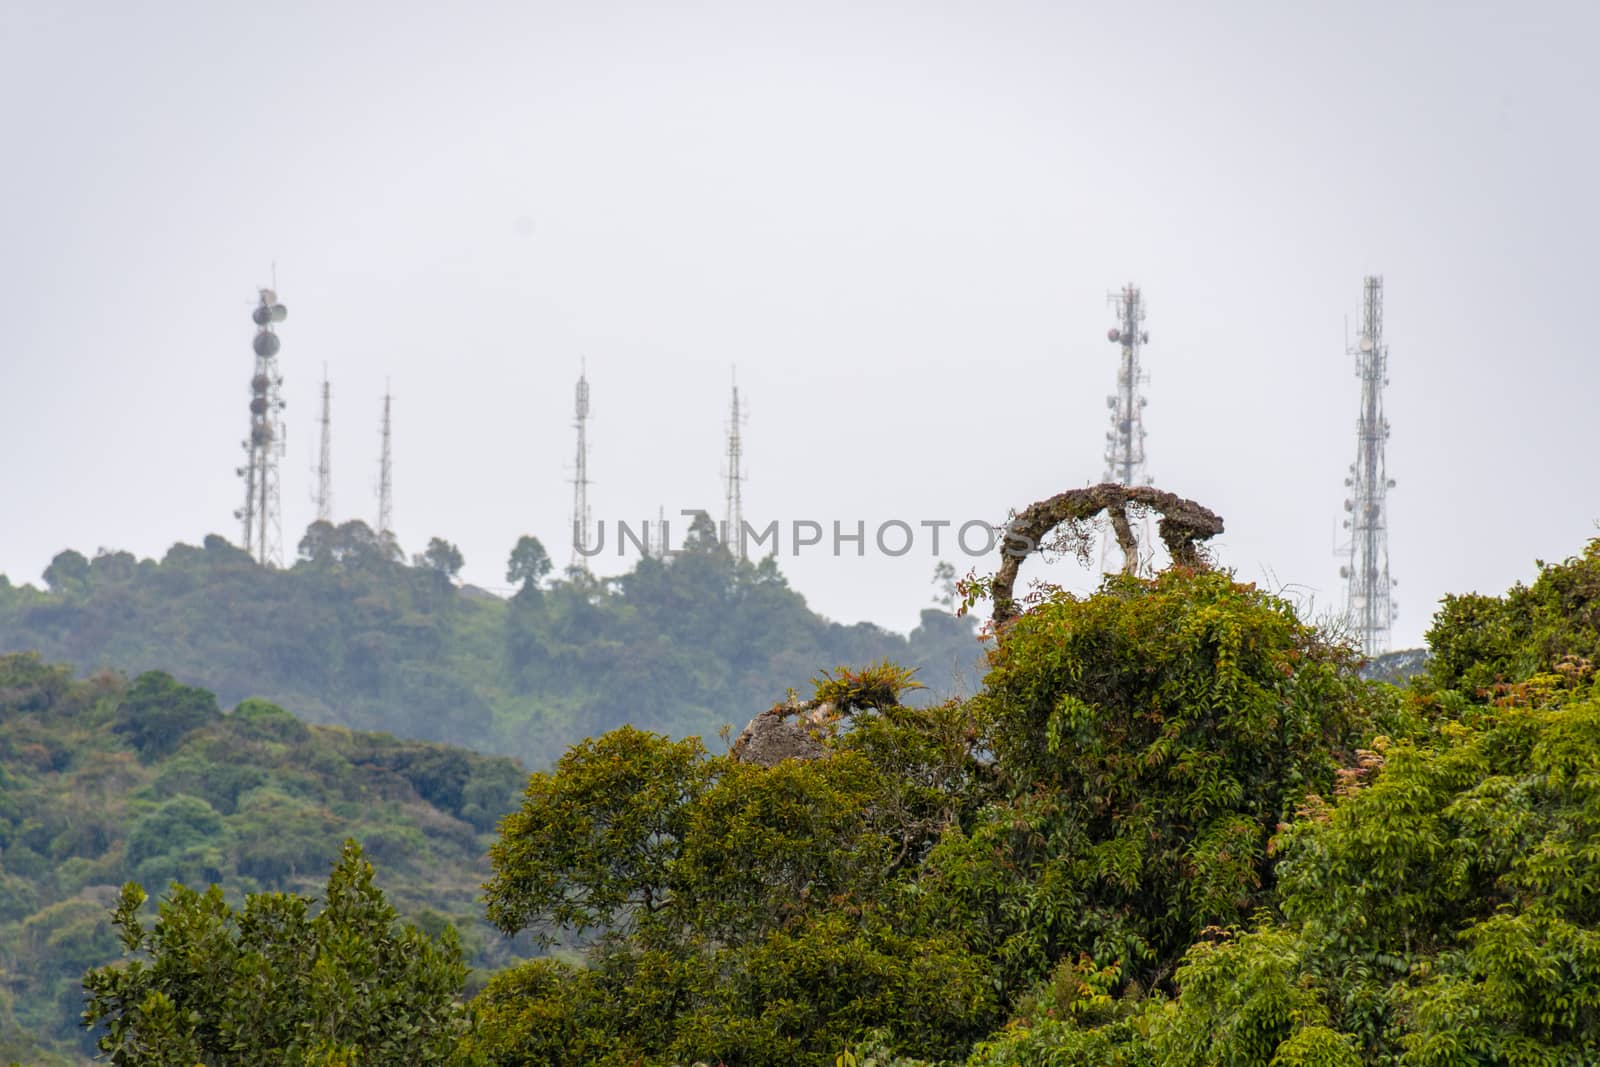 Tree tops of tropical rain forest in front of modern transmission tower